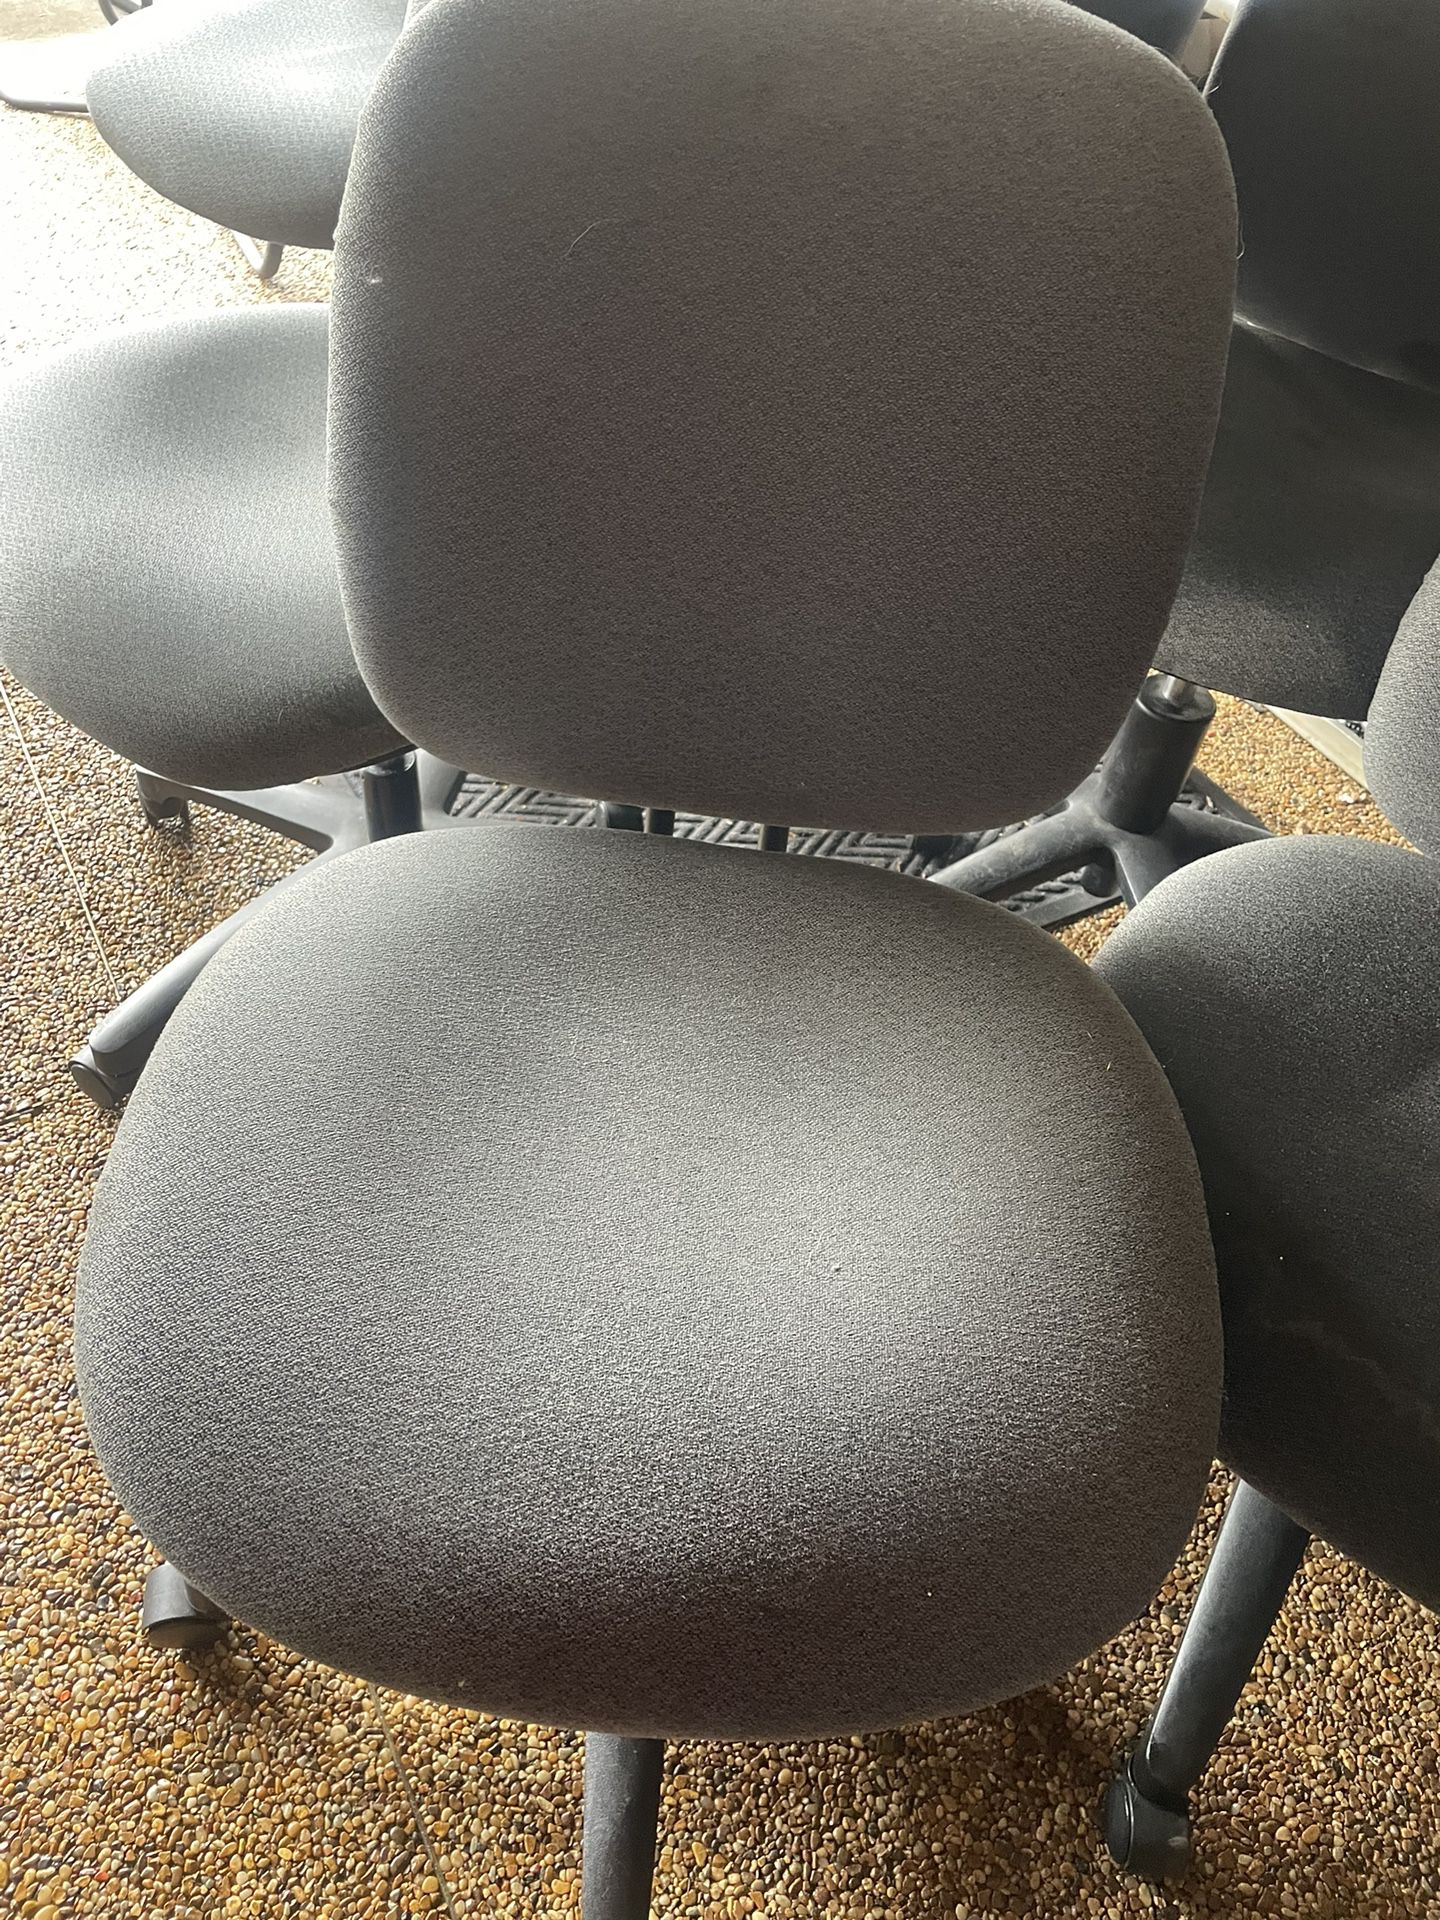 Office Chairs For Sale 